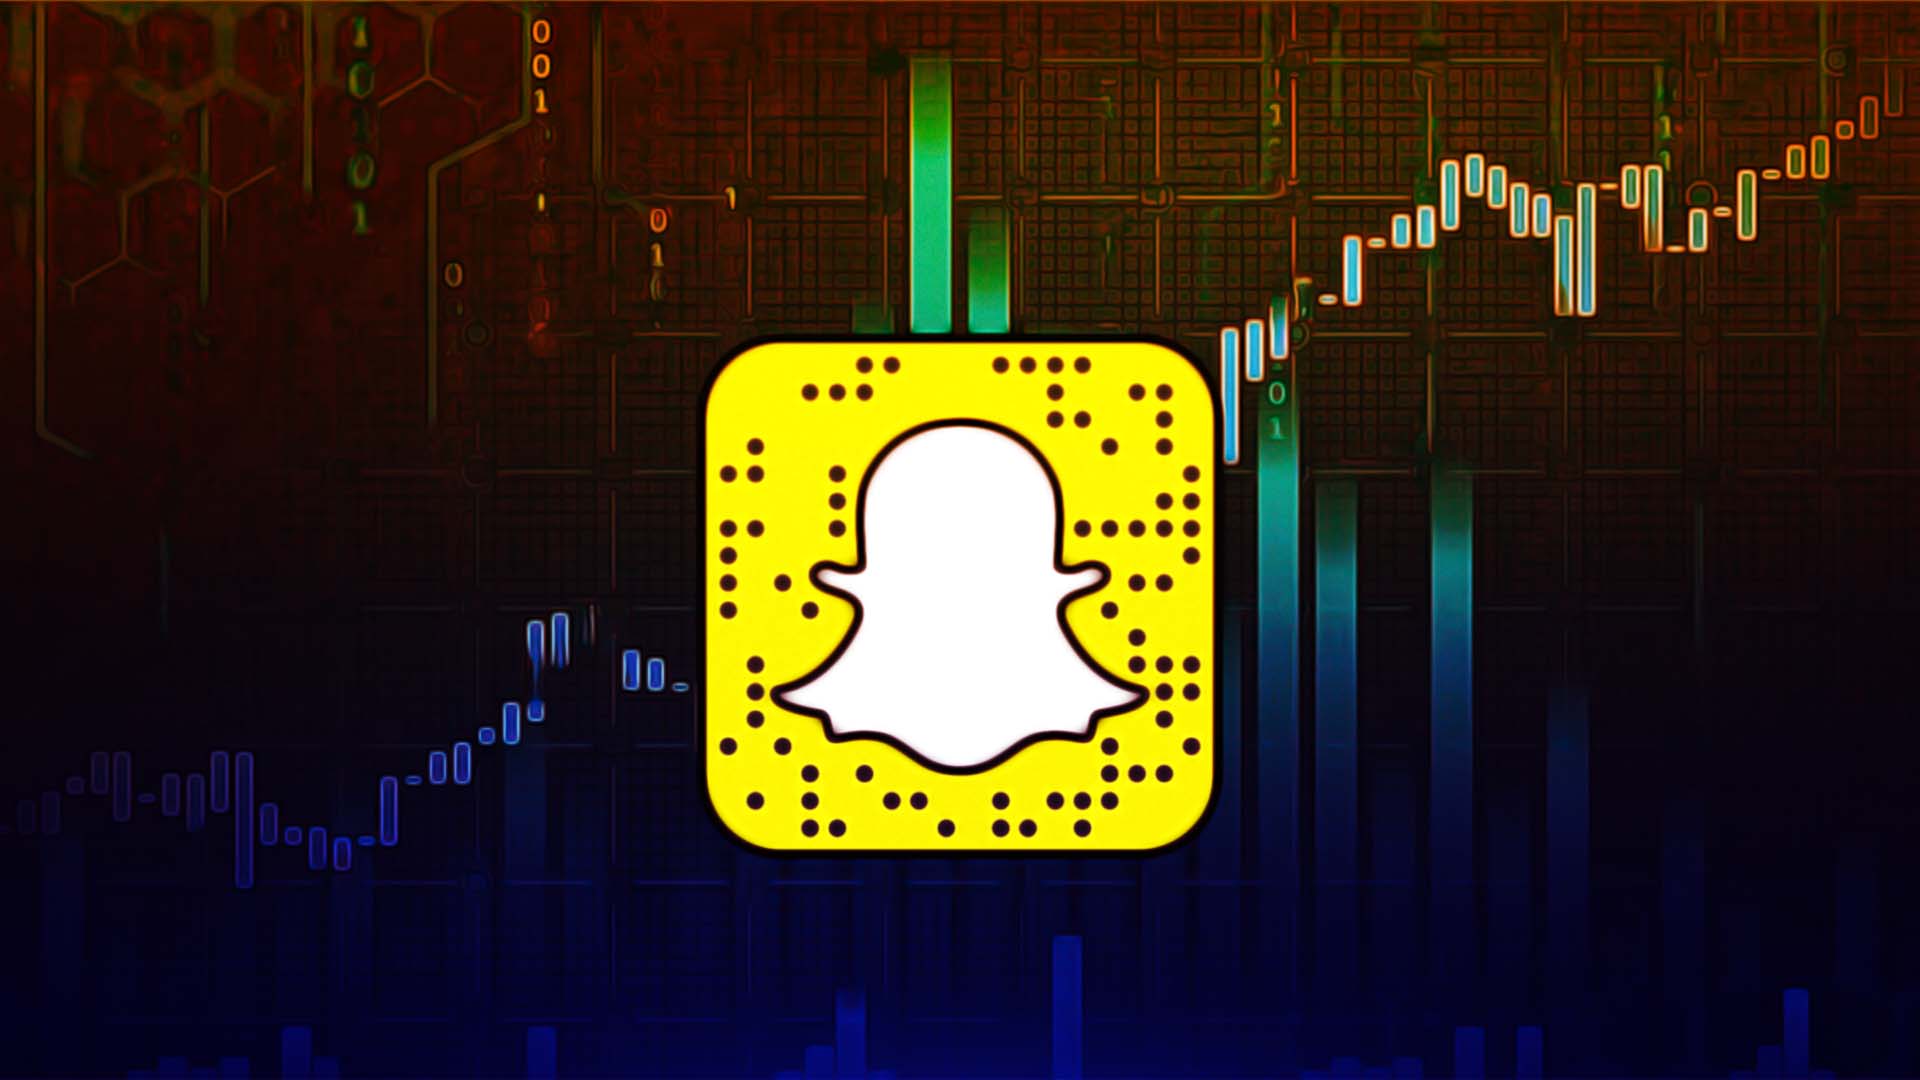 US Stocks Fell on The Fear of Recession, Snapchat Stock Price Also on The Same Route